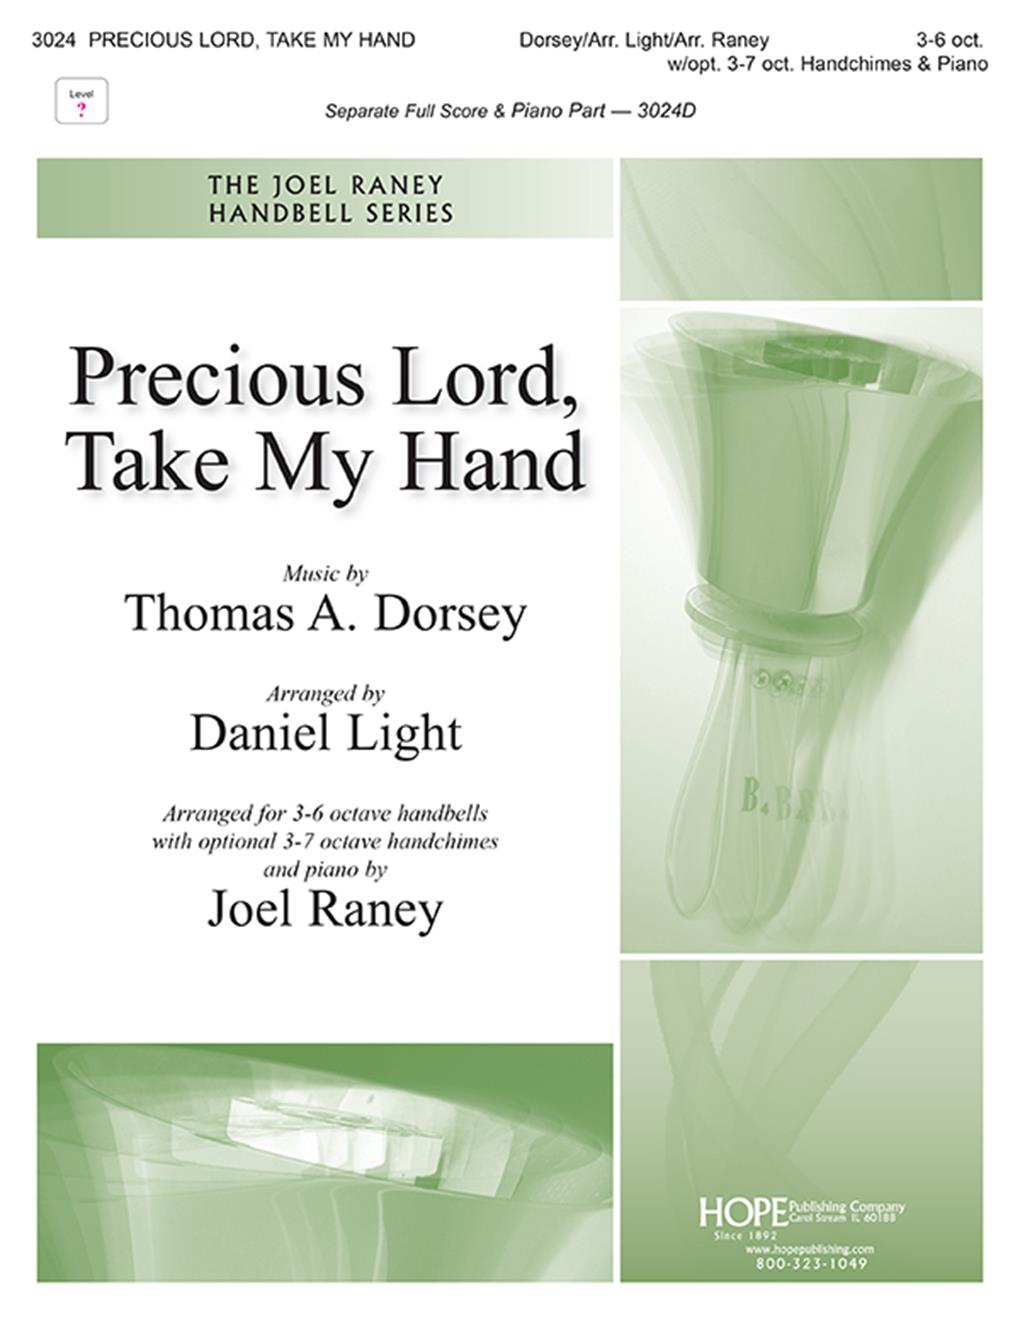 Precious Lord Take My Hand -3-6 oct. Cover Image